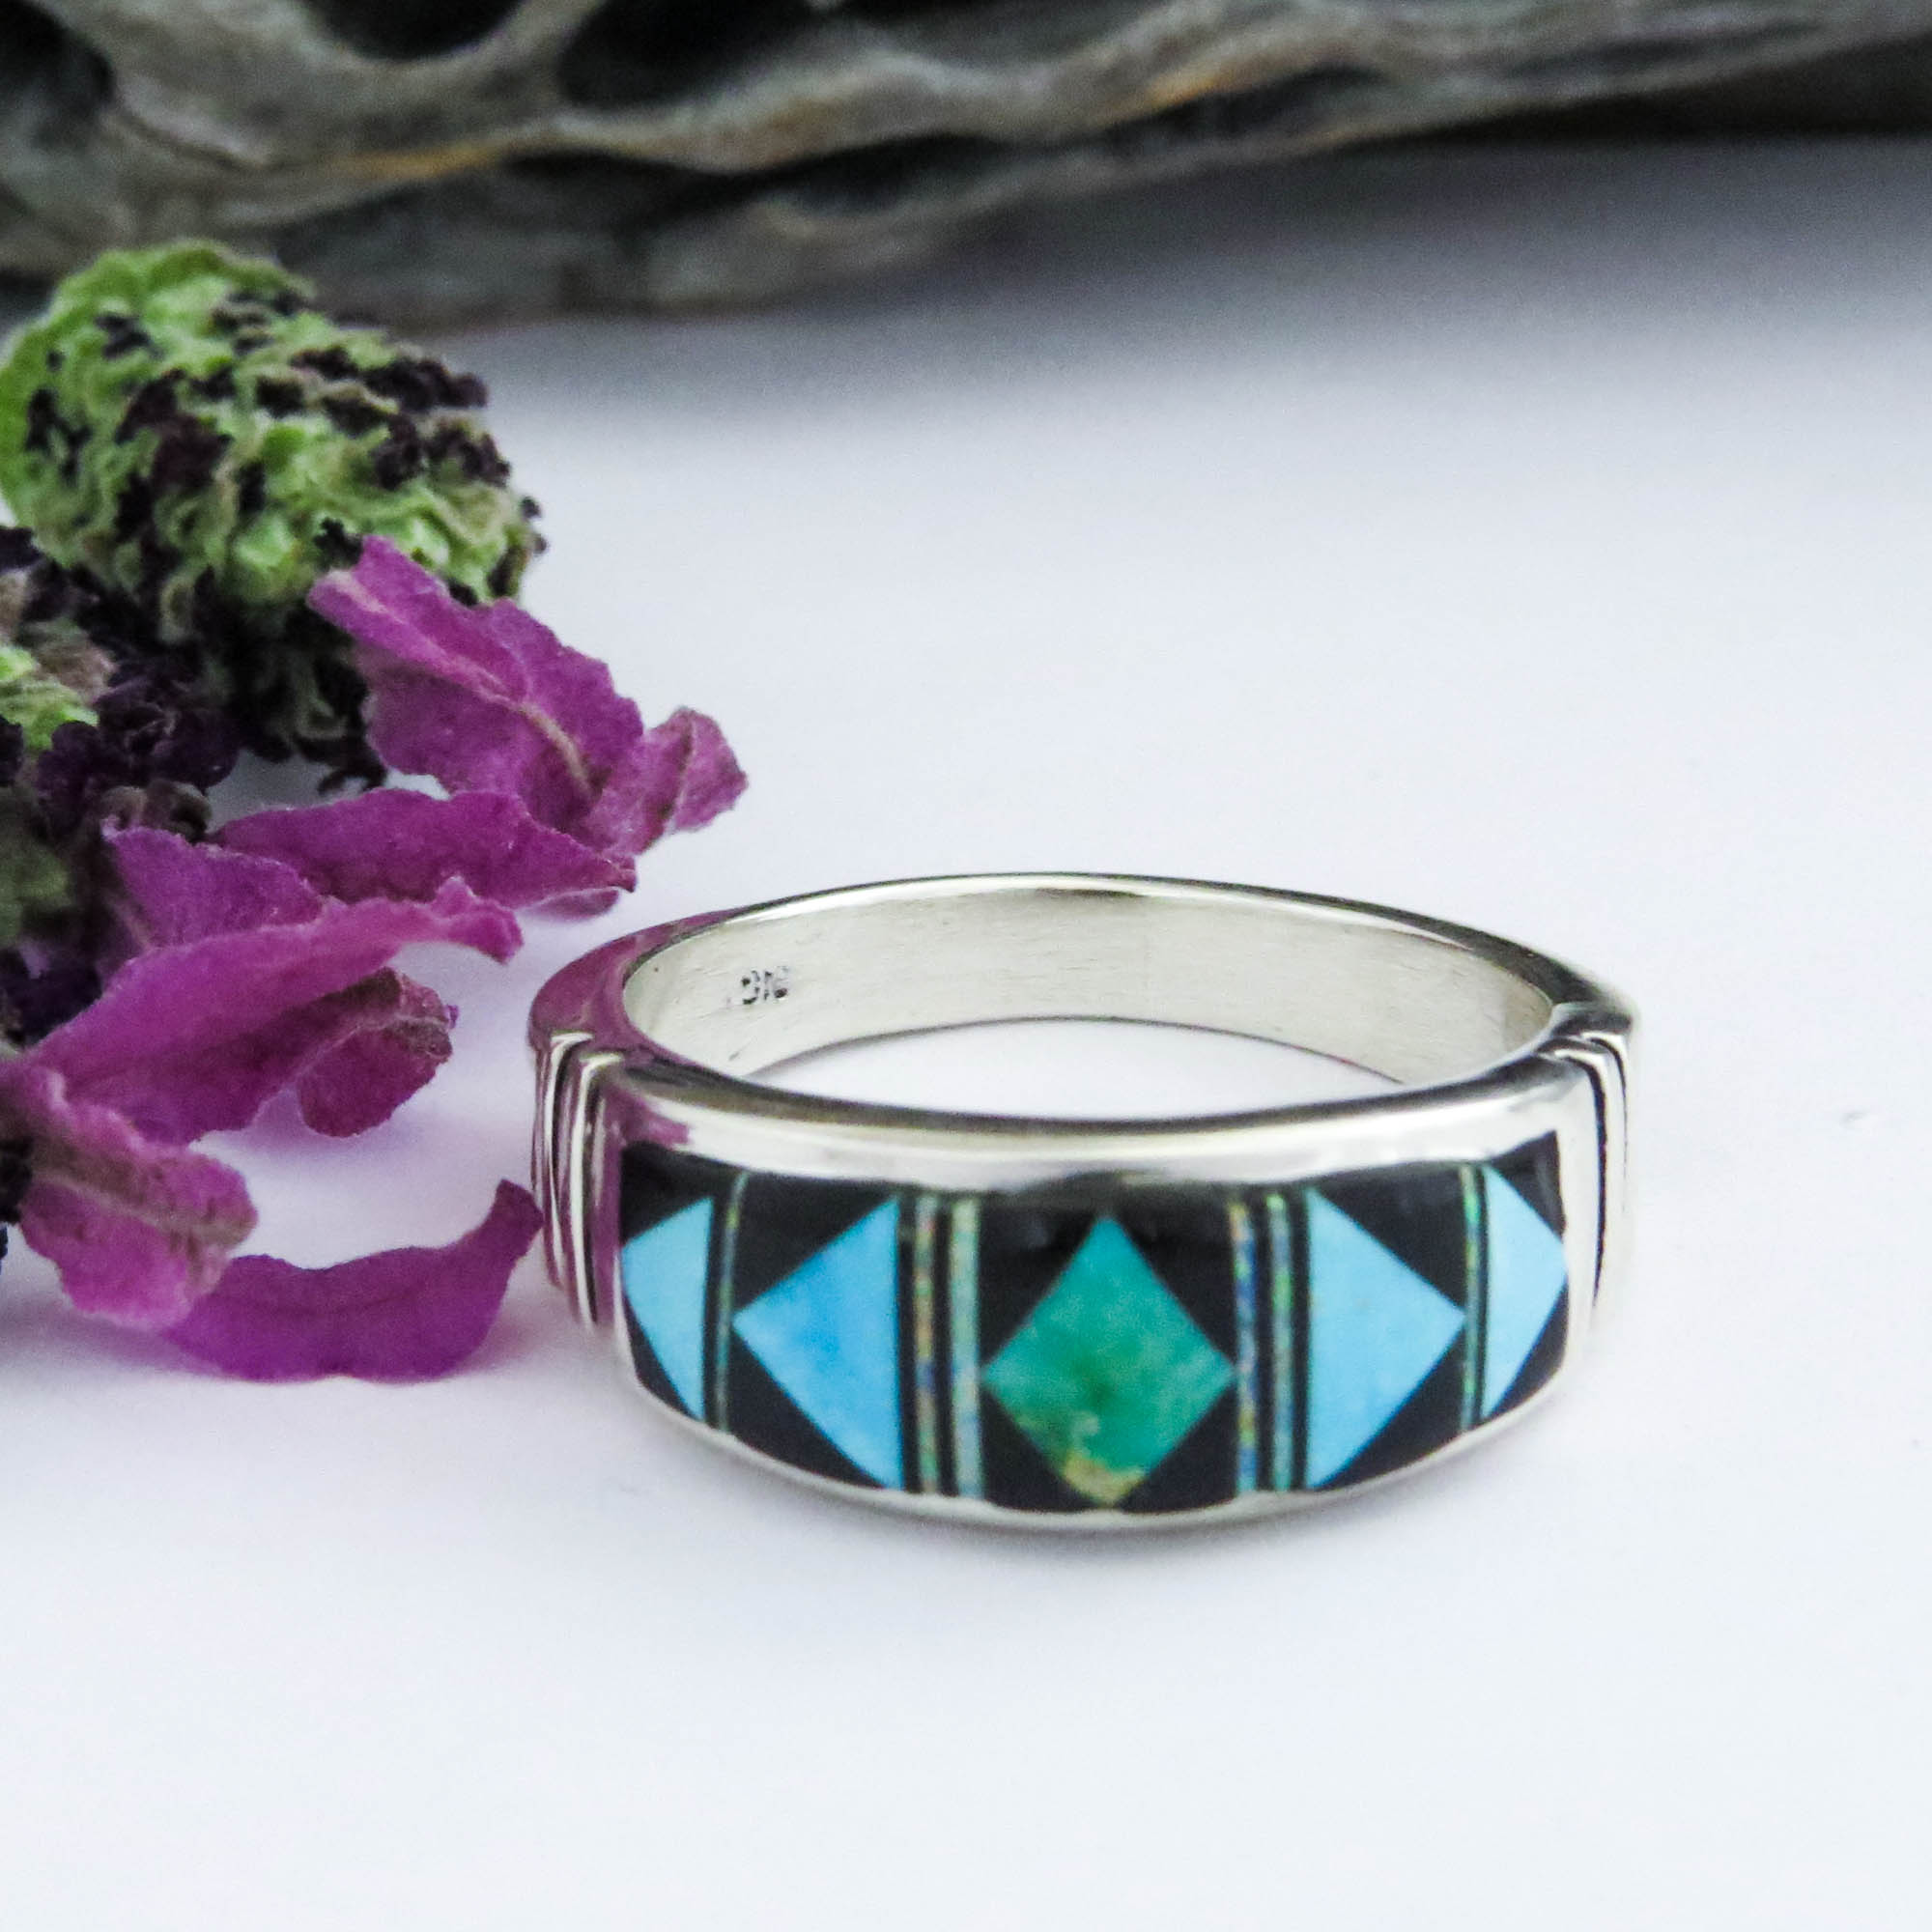 Details about   Mens Ring Channel Inlay Turquoise Sterling Silver size 12.75 